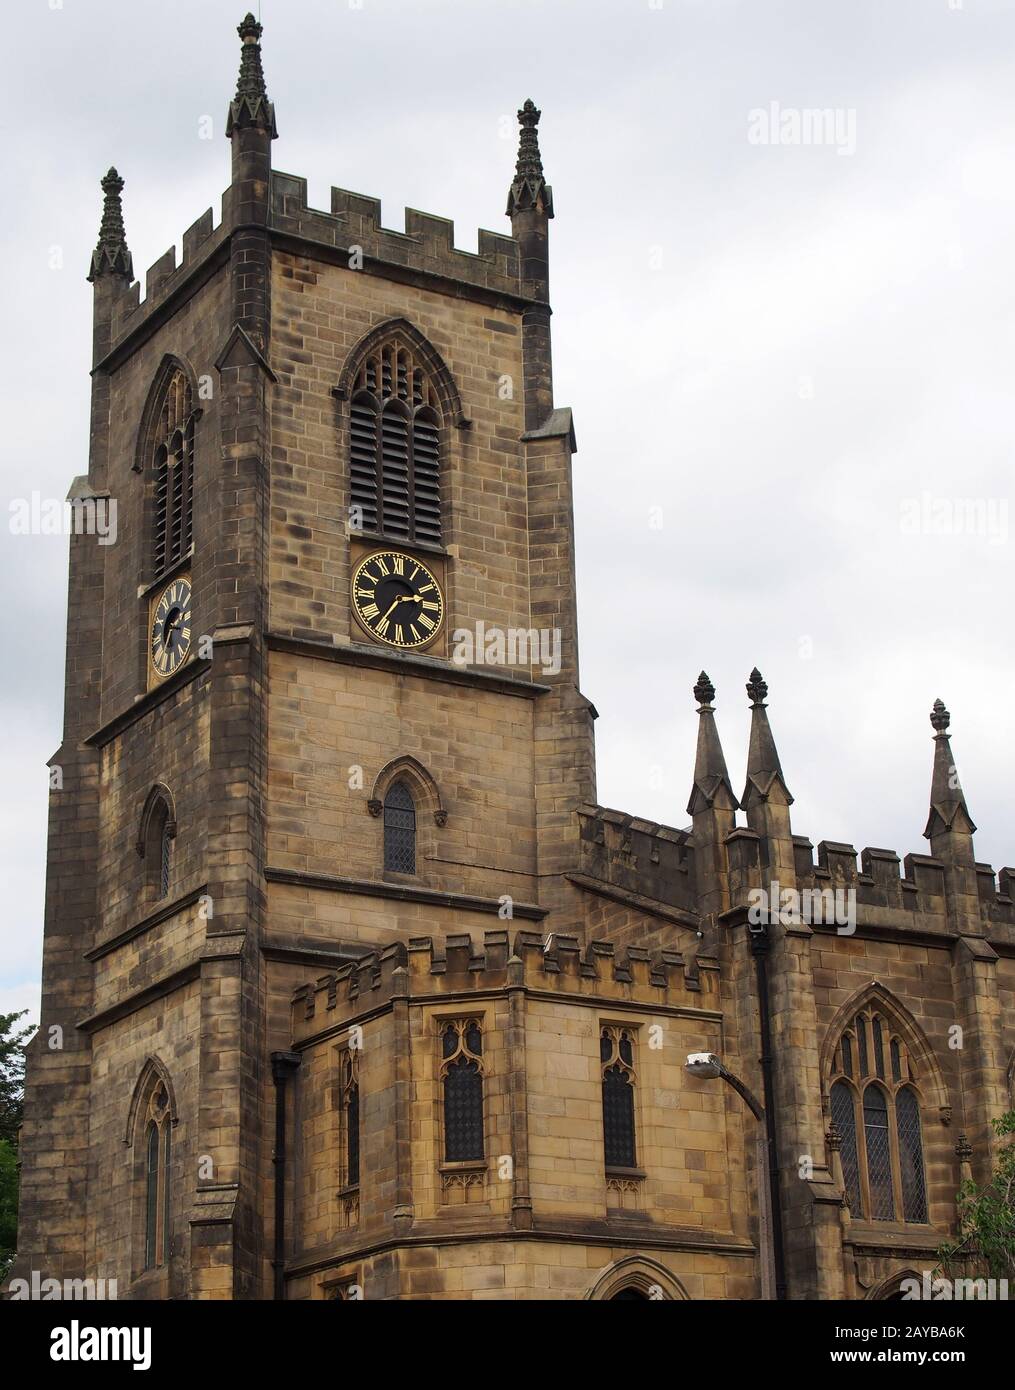 christ church in sowerby bridge west yorkshire built in a medieval style in 1821 with ornate stone work and clock tower Stock Photo